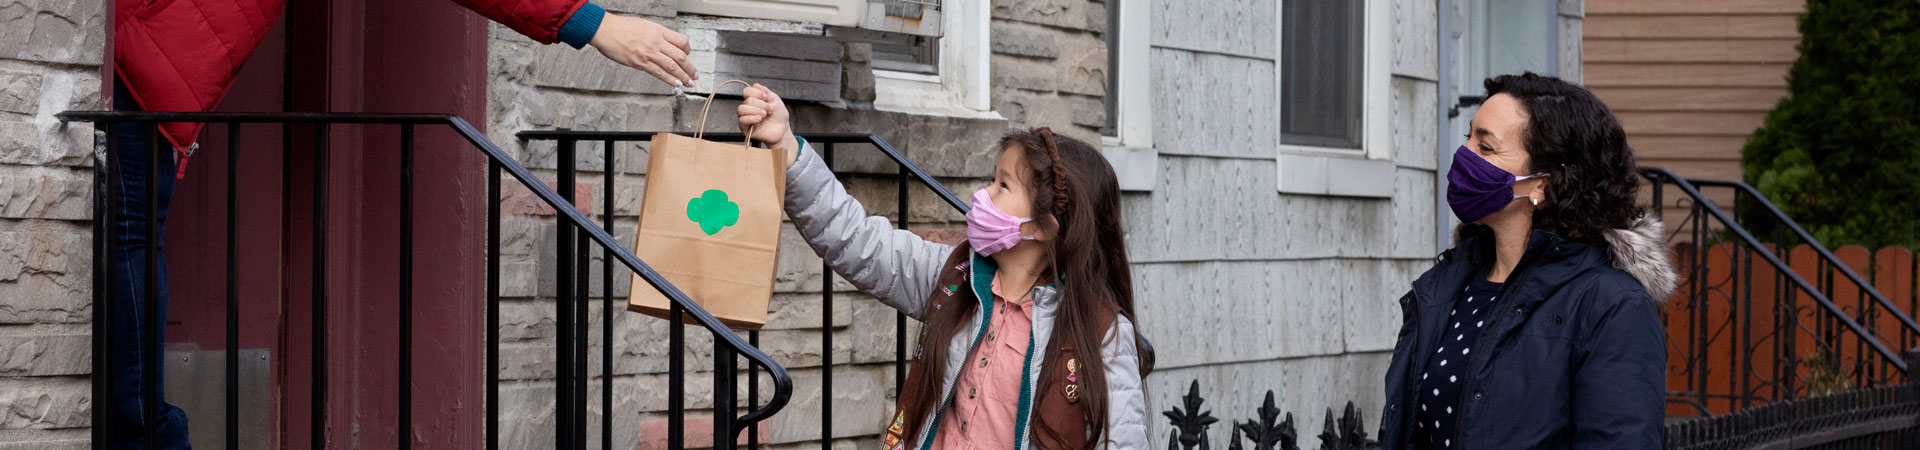  A Girl Scout wearing a pink face mask hands a brown paper bag with a green trefoil to someone standing on a porch. A masked caregiver supervises.  